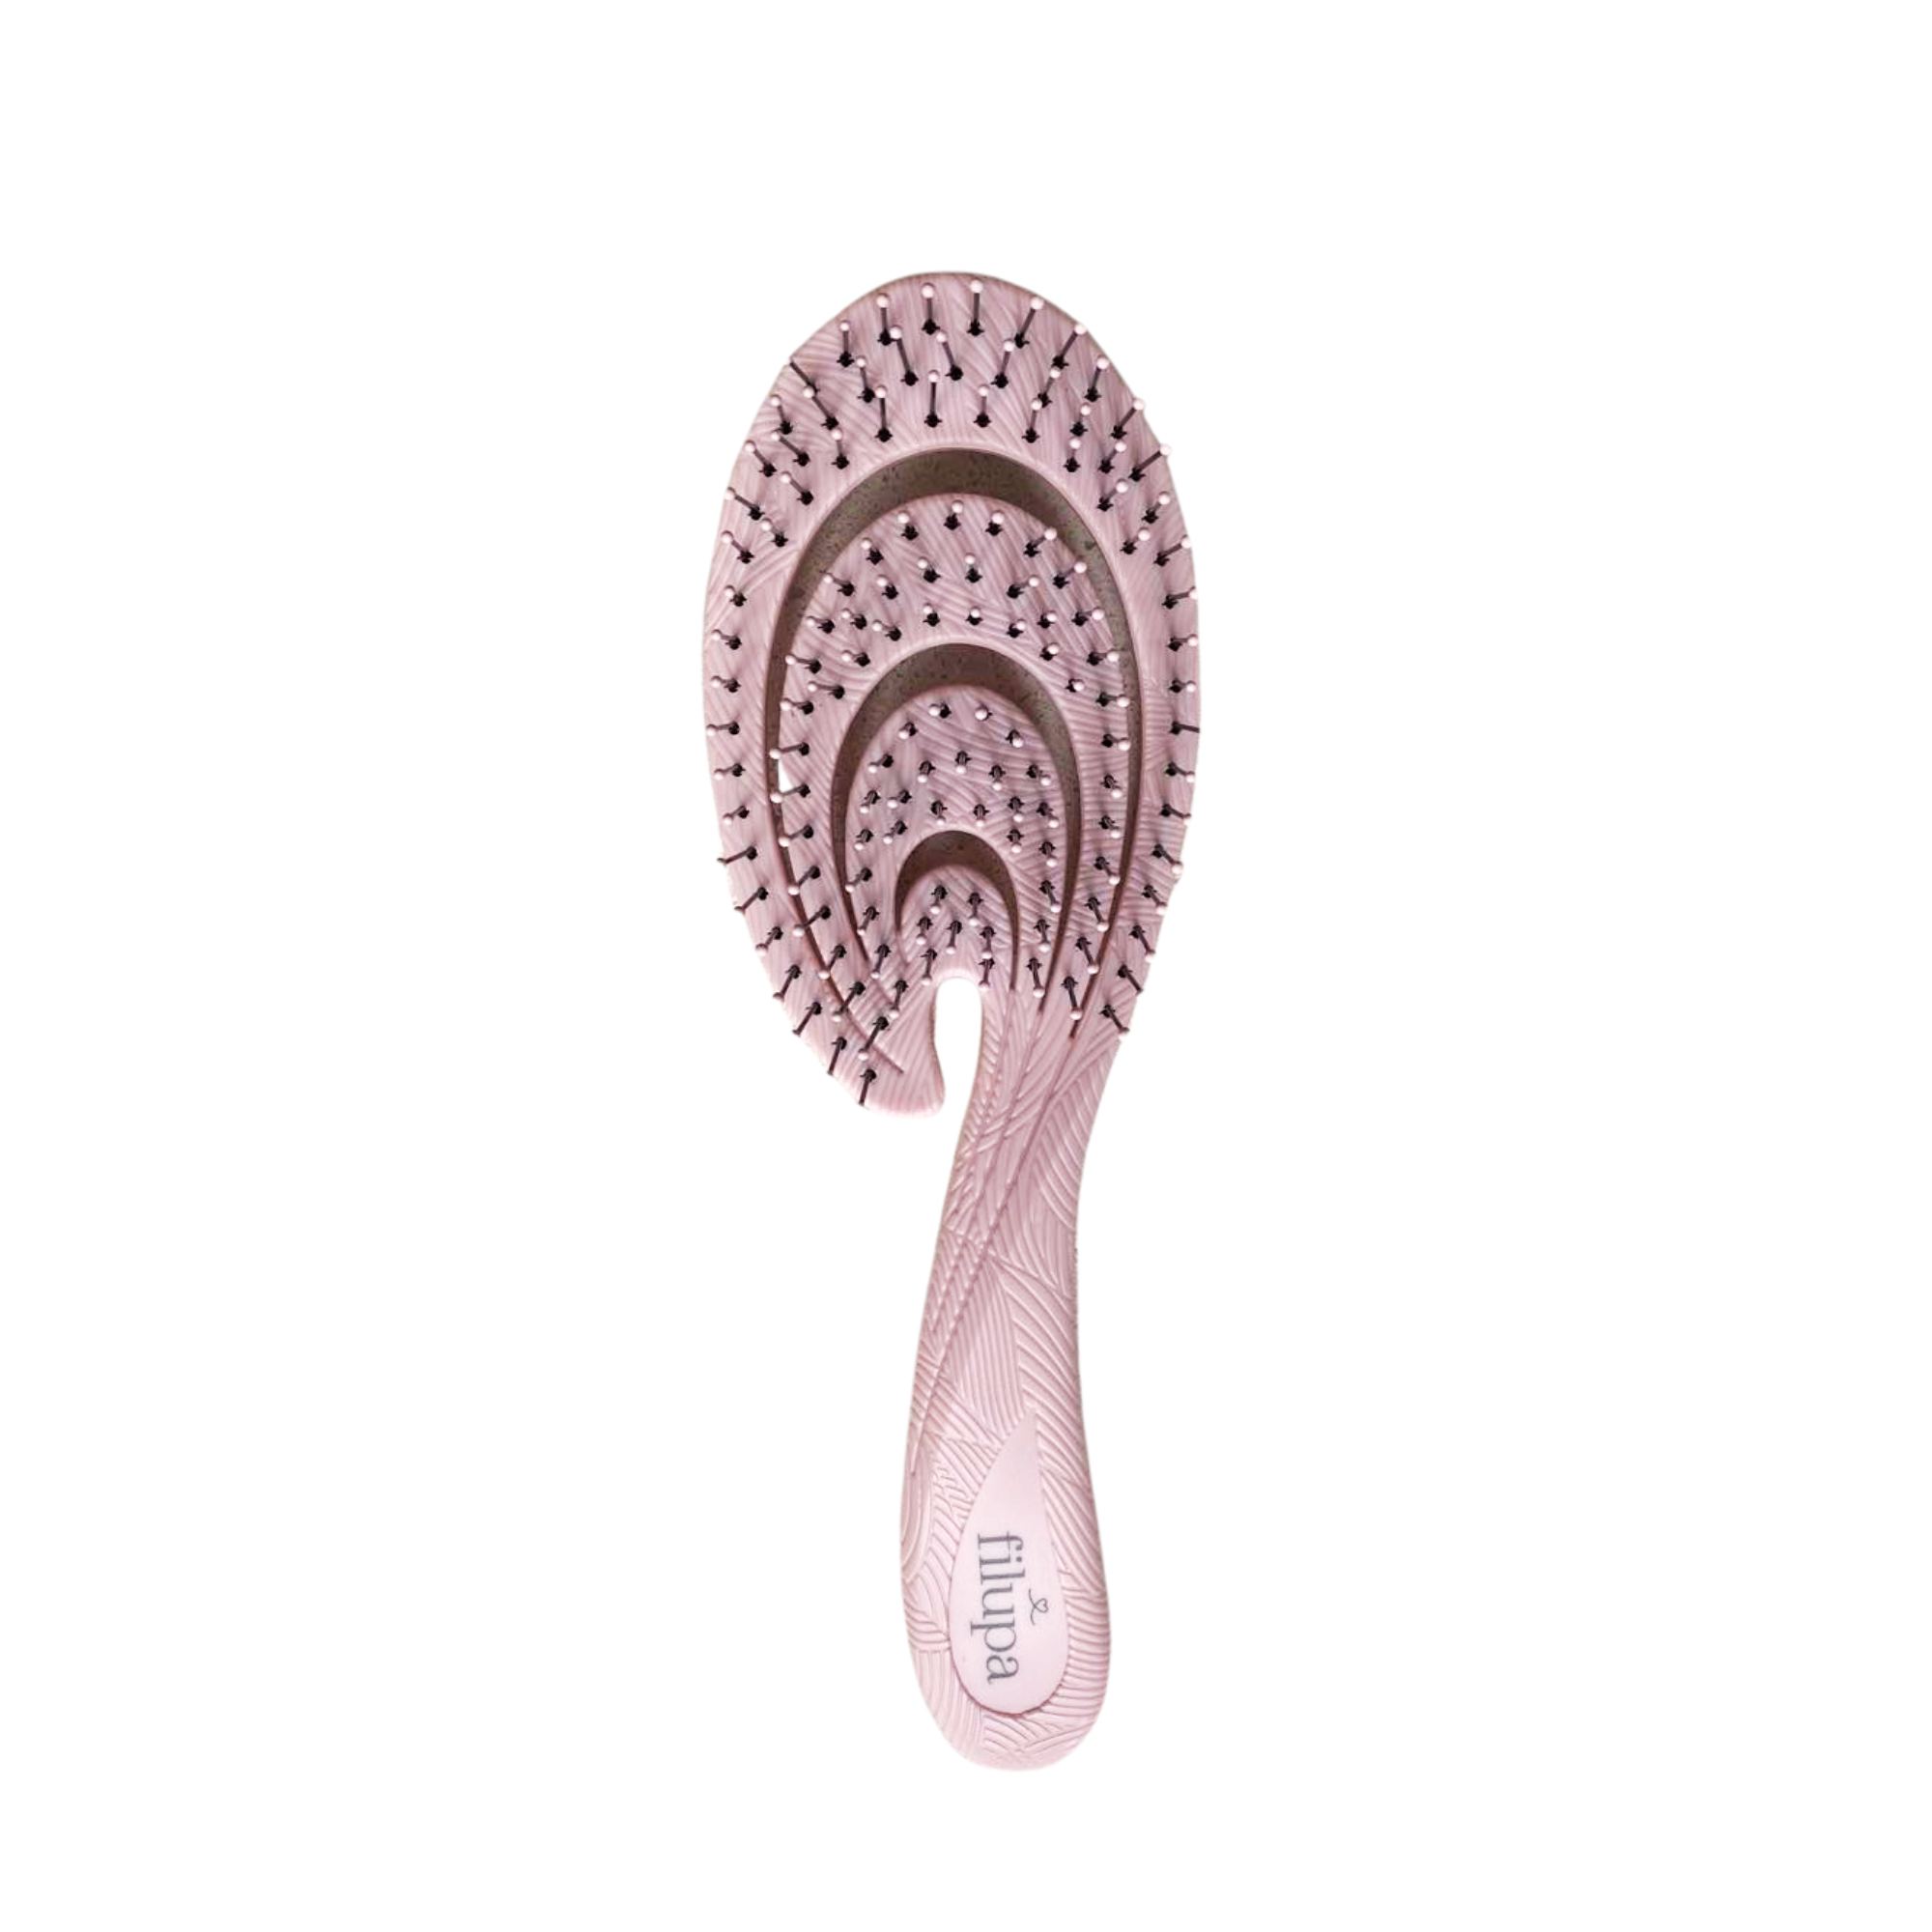 Filupa Pale Pink Brush from Nordic Bio Brush is 100% recyclable. The brush won't pull on your hair and smoothes the finer hair with ease.